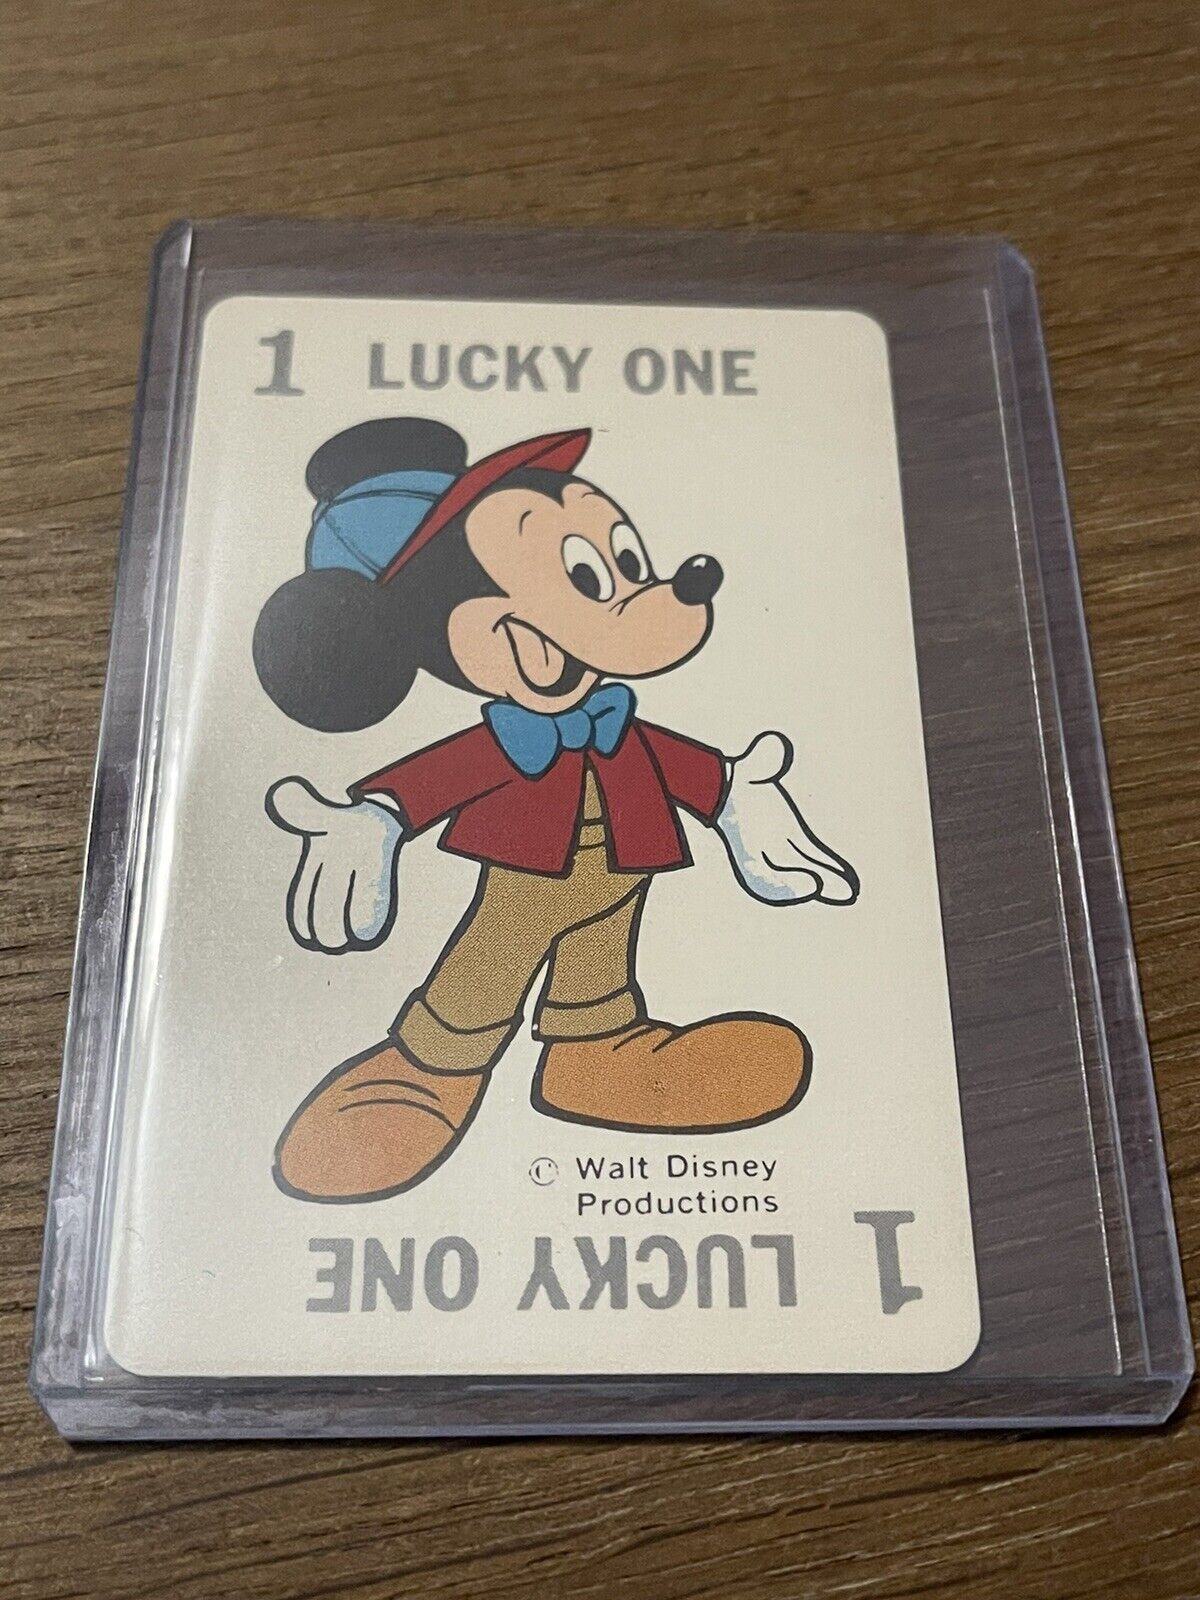 Vintage Walt Disney Productions 🎥 Mickey Mouse Card Game Playing Card LUCKY 1 